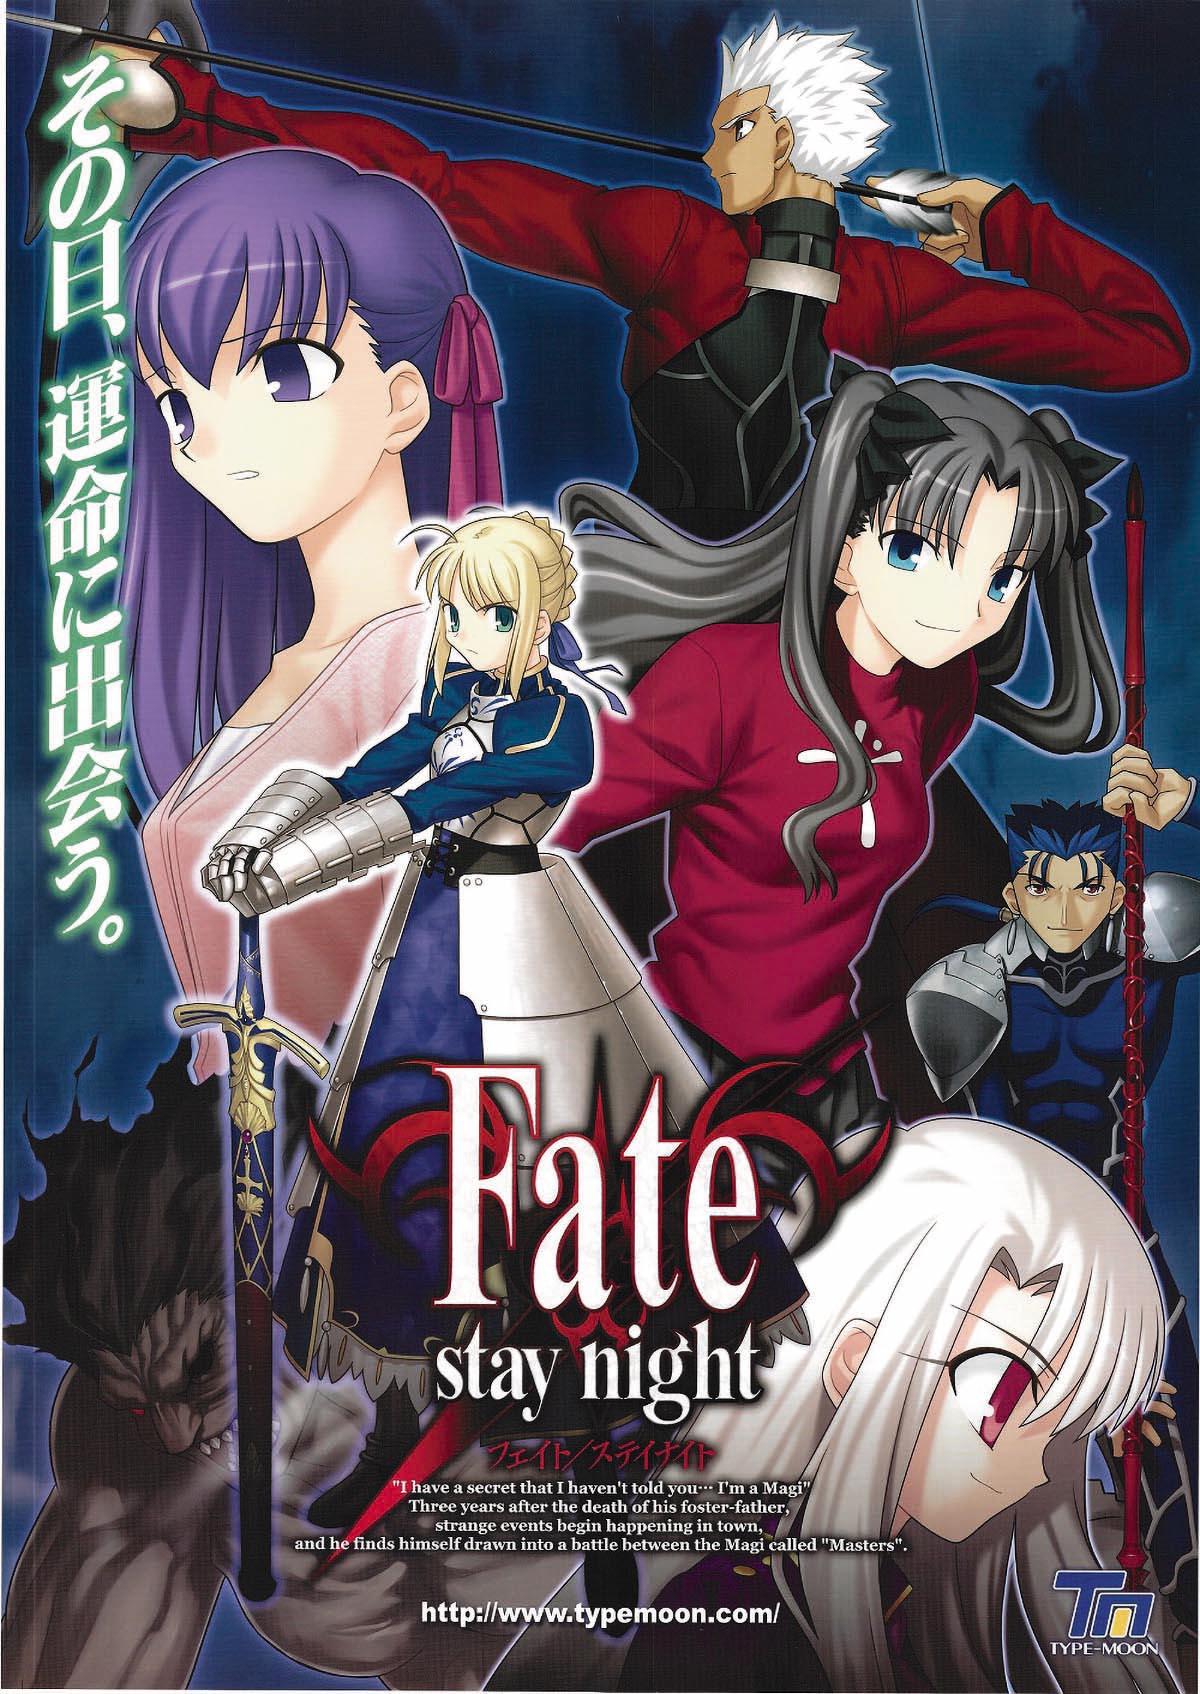 Fate Stay Night Pc Version Promotional Use Poster 1